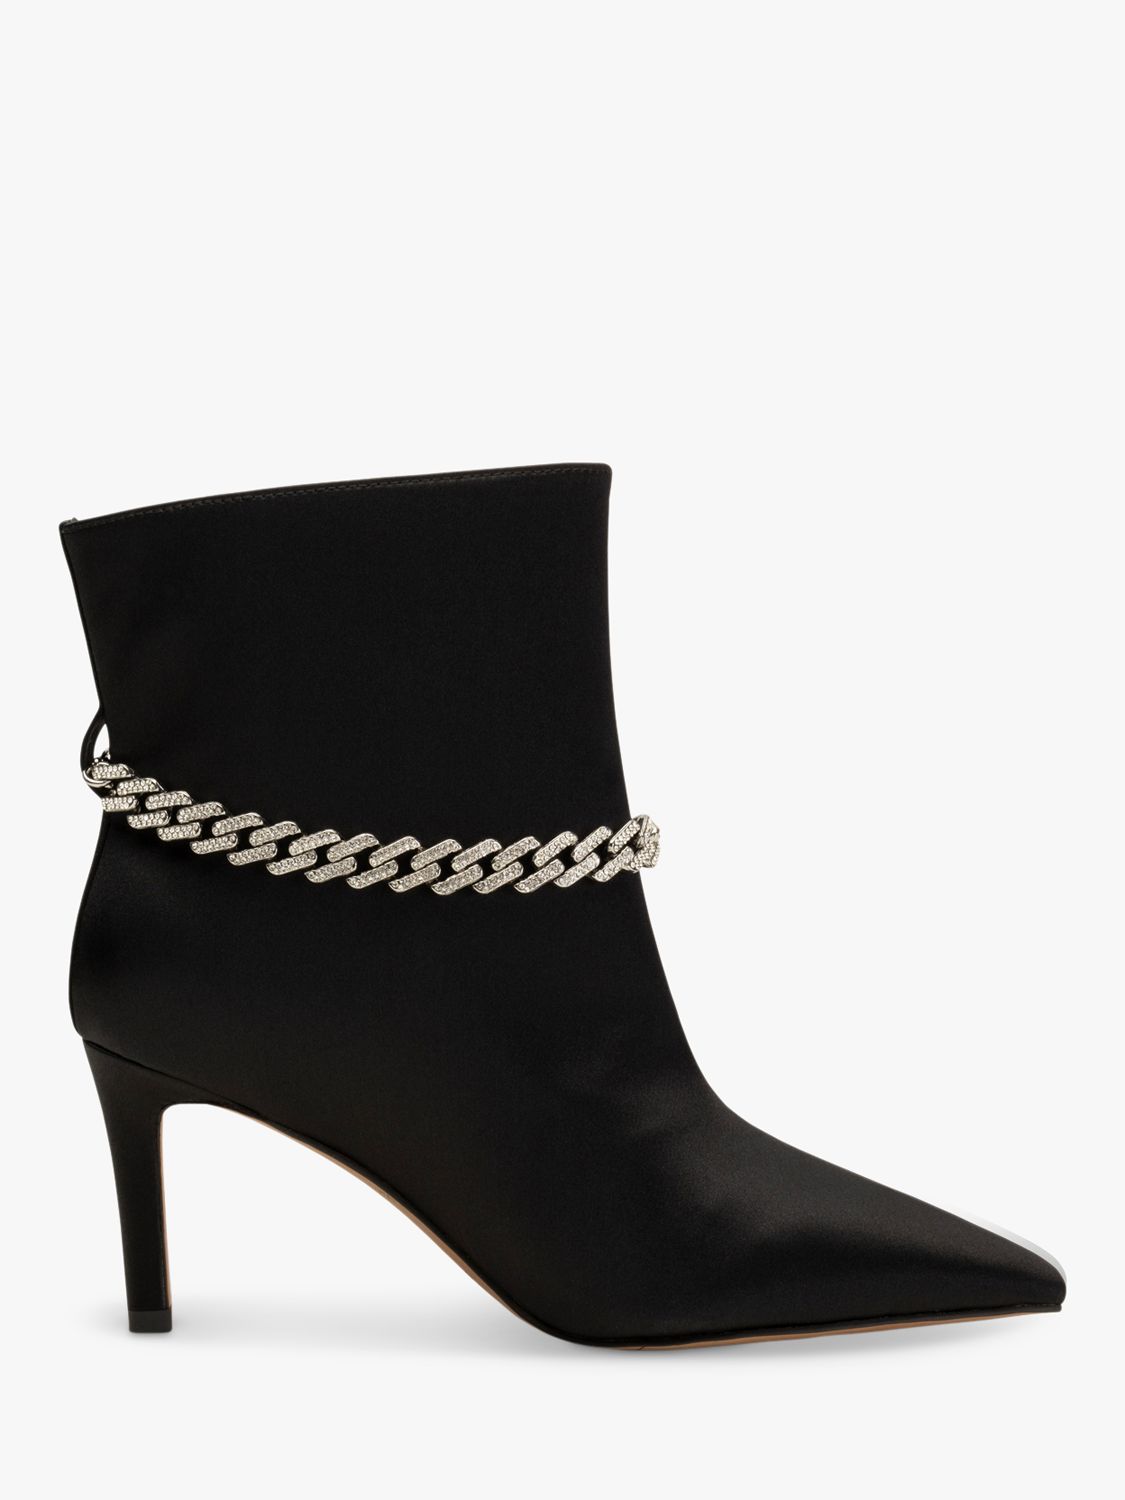 SHOE THE BEAR Harper Satin Chain Ankle Boots, Black at John Lewis ...